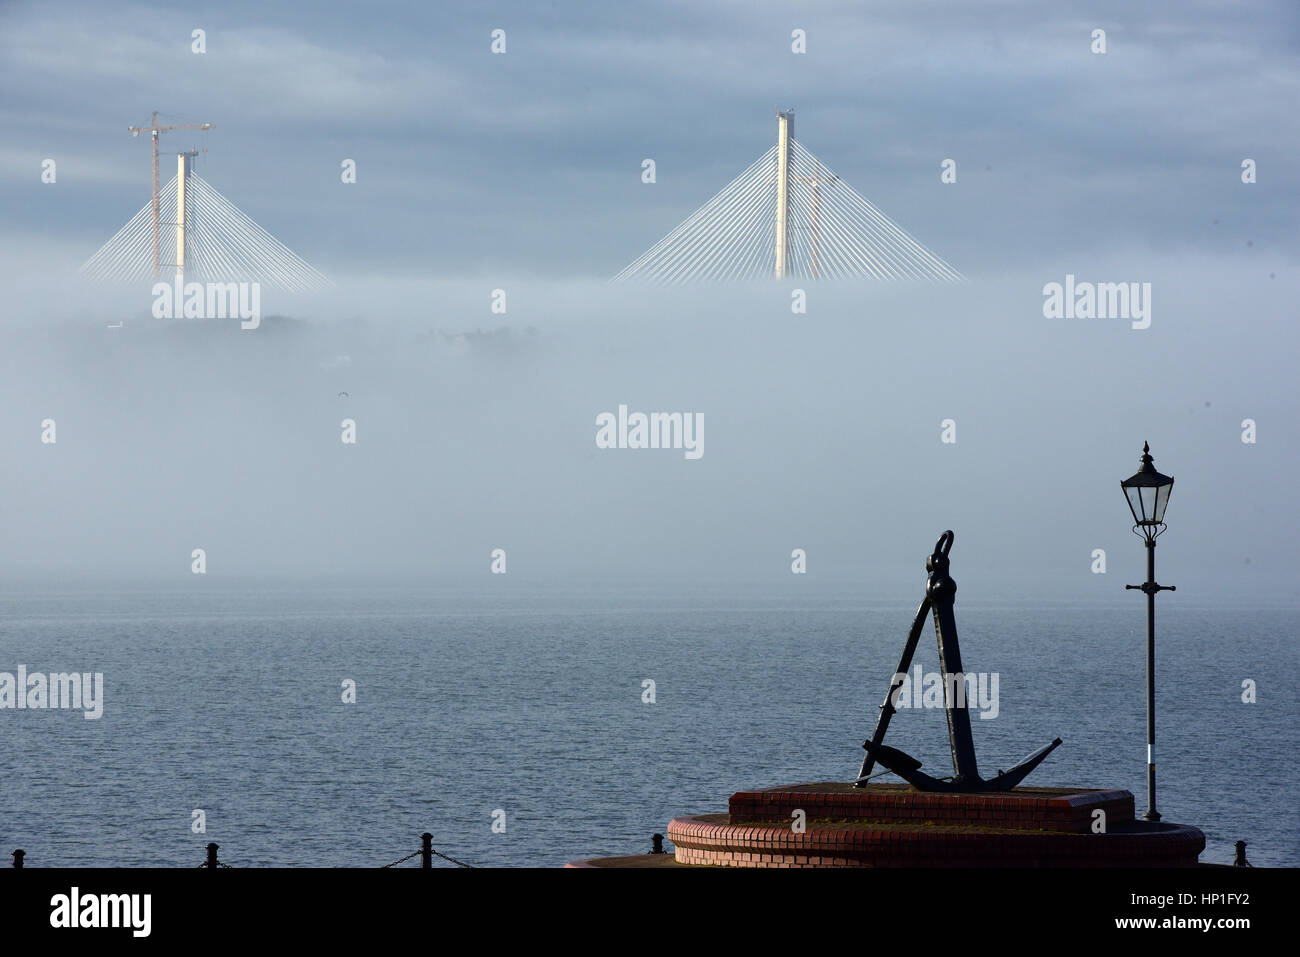 Inverkeithing, Scotland, UK. 17th February, 2017. The towers of the new Queensferry Crossing bridge across the Forth Estuary rise out of the morning mist, viewed from the seafront at St David's Harbour, Dalgety Bay, Credit: Ken Jack/Alamy Live News Stock Photo